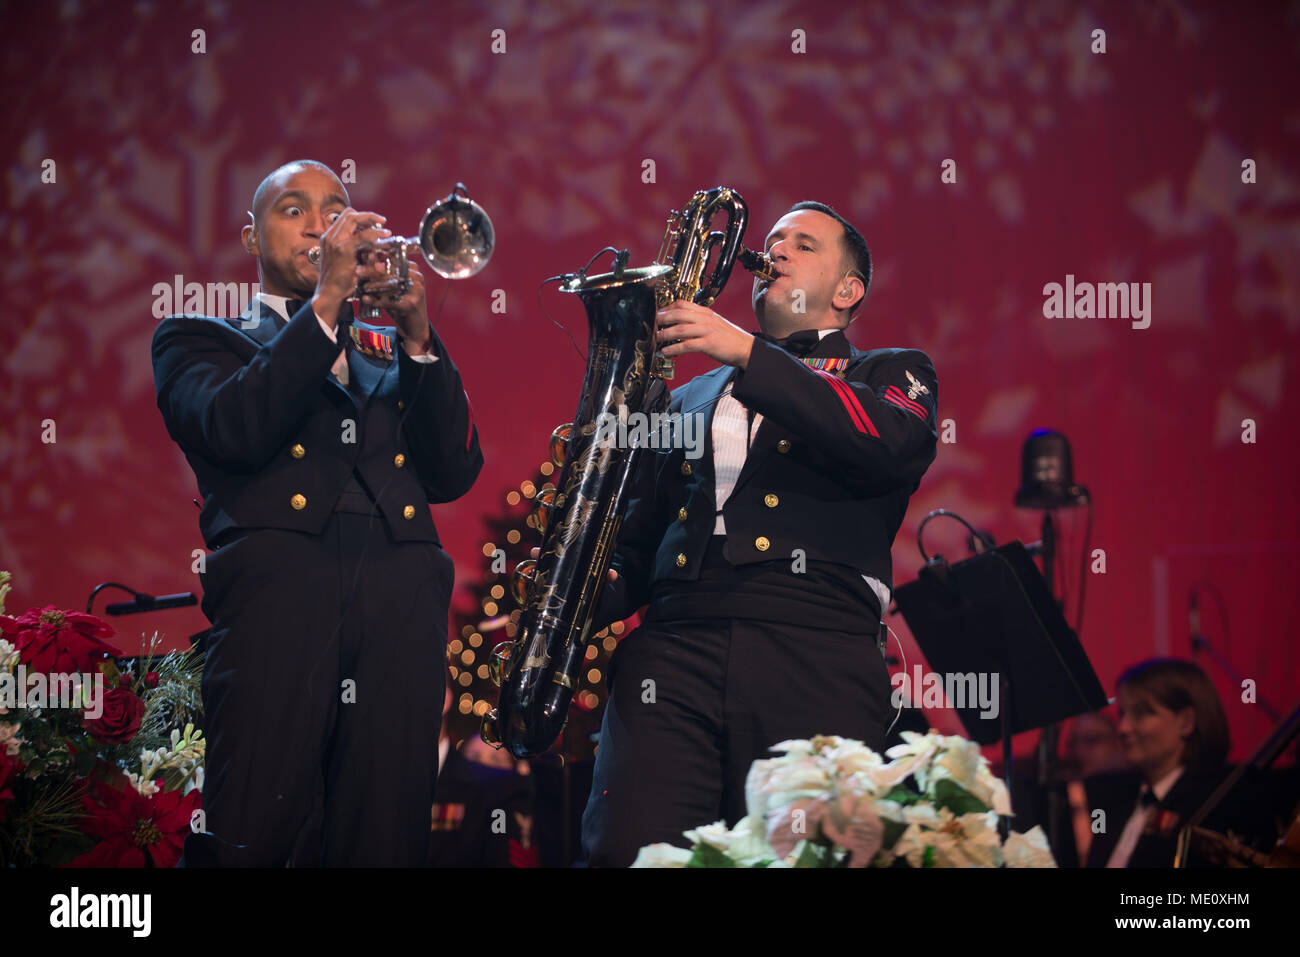 171216-N-VV903-1103 WASHINGTON (Dec. 16, 2017) Musicians 1st Class David A. Smith and  Manuel Pelayo de Gongora perform with the U.S. Navy Band during a holiday concert at DAR Constitution Hall in Washington. The Navy Band hosted thousands of people from the Washington area as well as hundreds of senior Navy and government officials during its three annual holiday concerts. (U.S. Navy photo by Musician 1st Class David Aspinwall/Released) Stock Photo